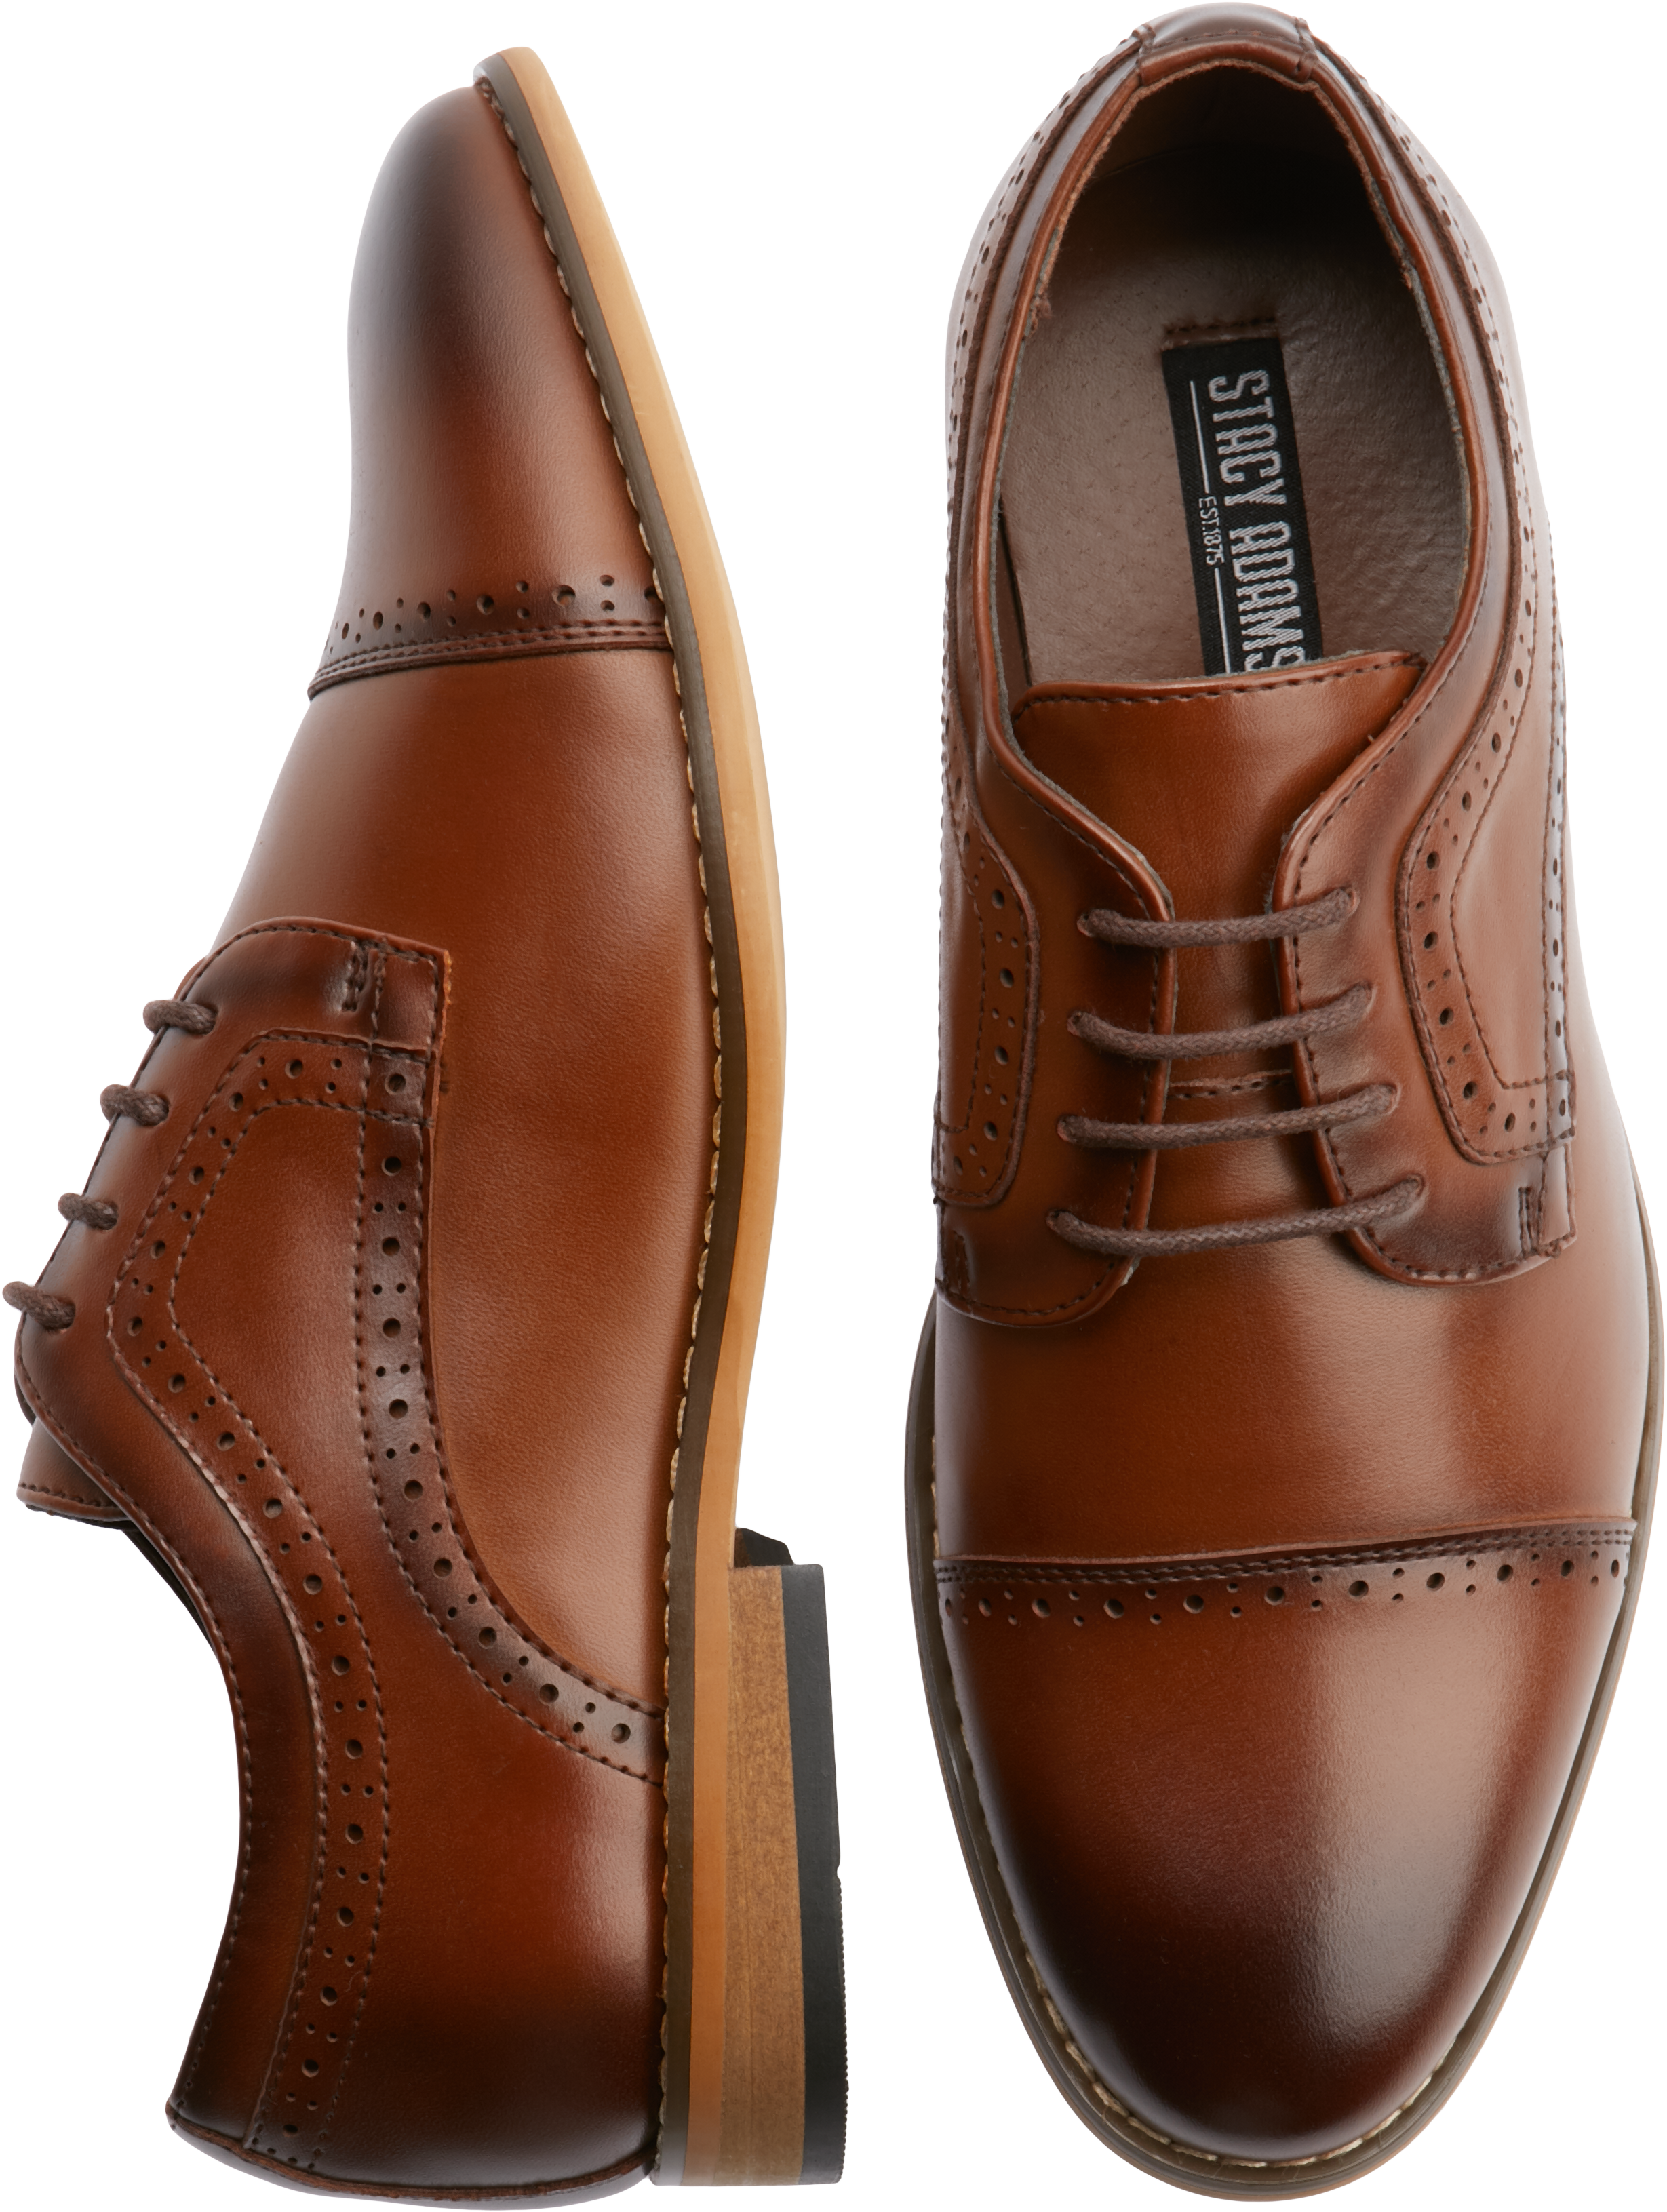 Stacy Adams Mens shoes Atwell Cognac Plain toe oxford Lace Up Casual 24811-221 